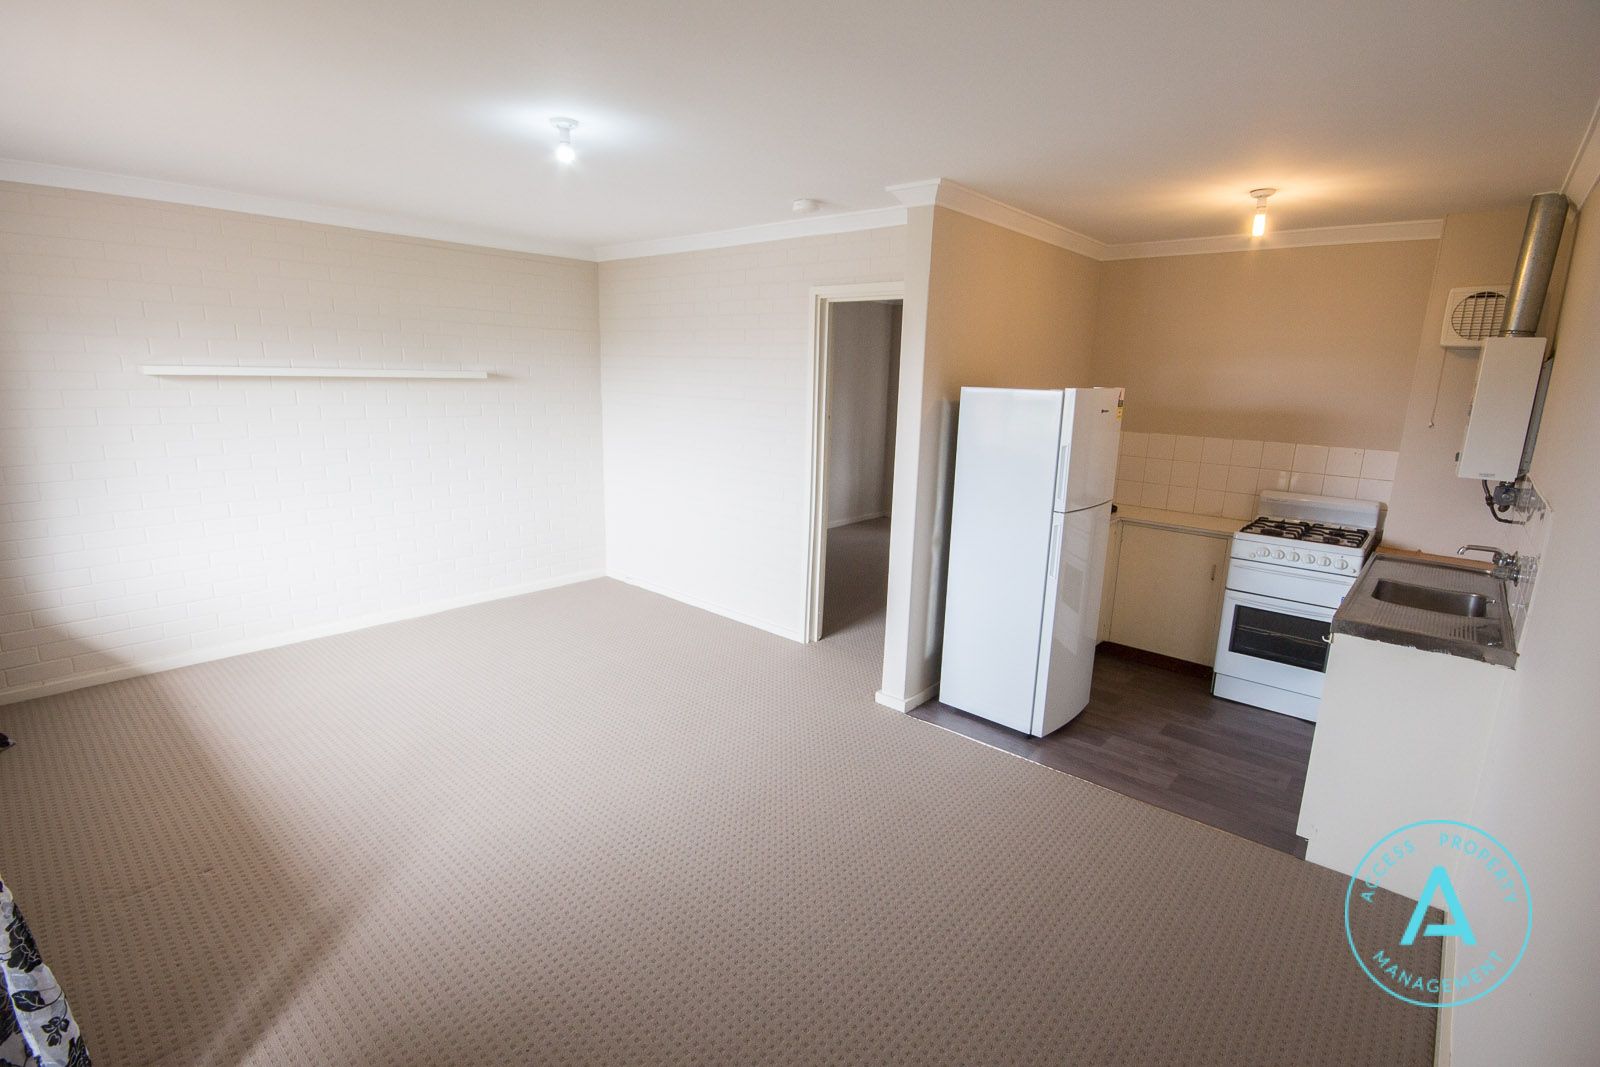 1 bedrooms Apartment / Unit / Flat in 13/9 Violet Street WEST PERTH WA, 6005